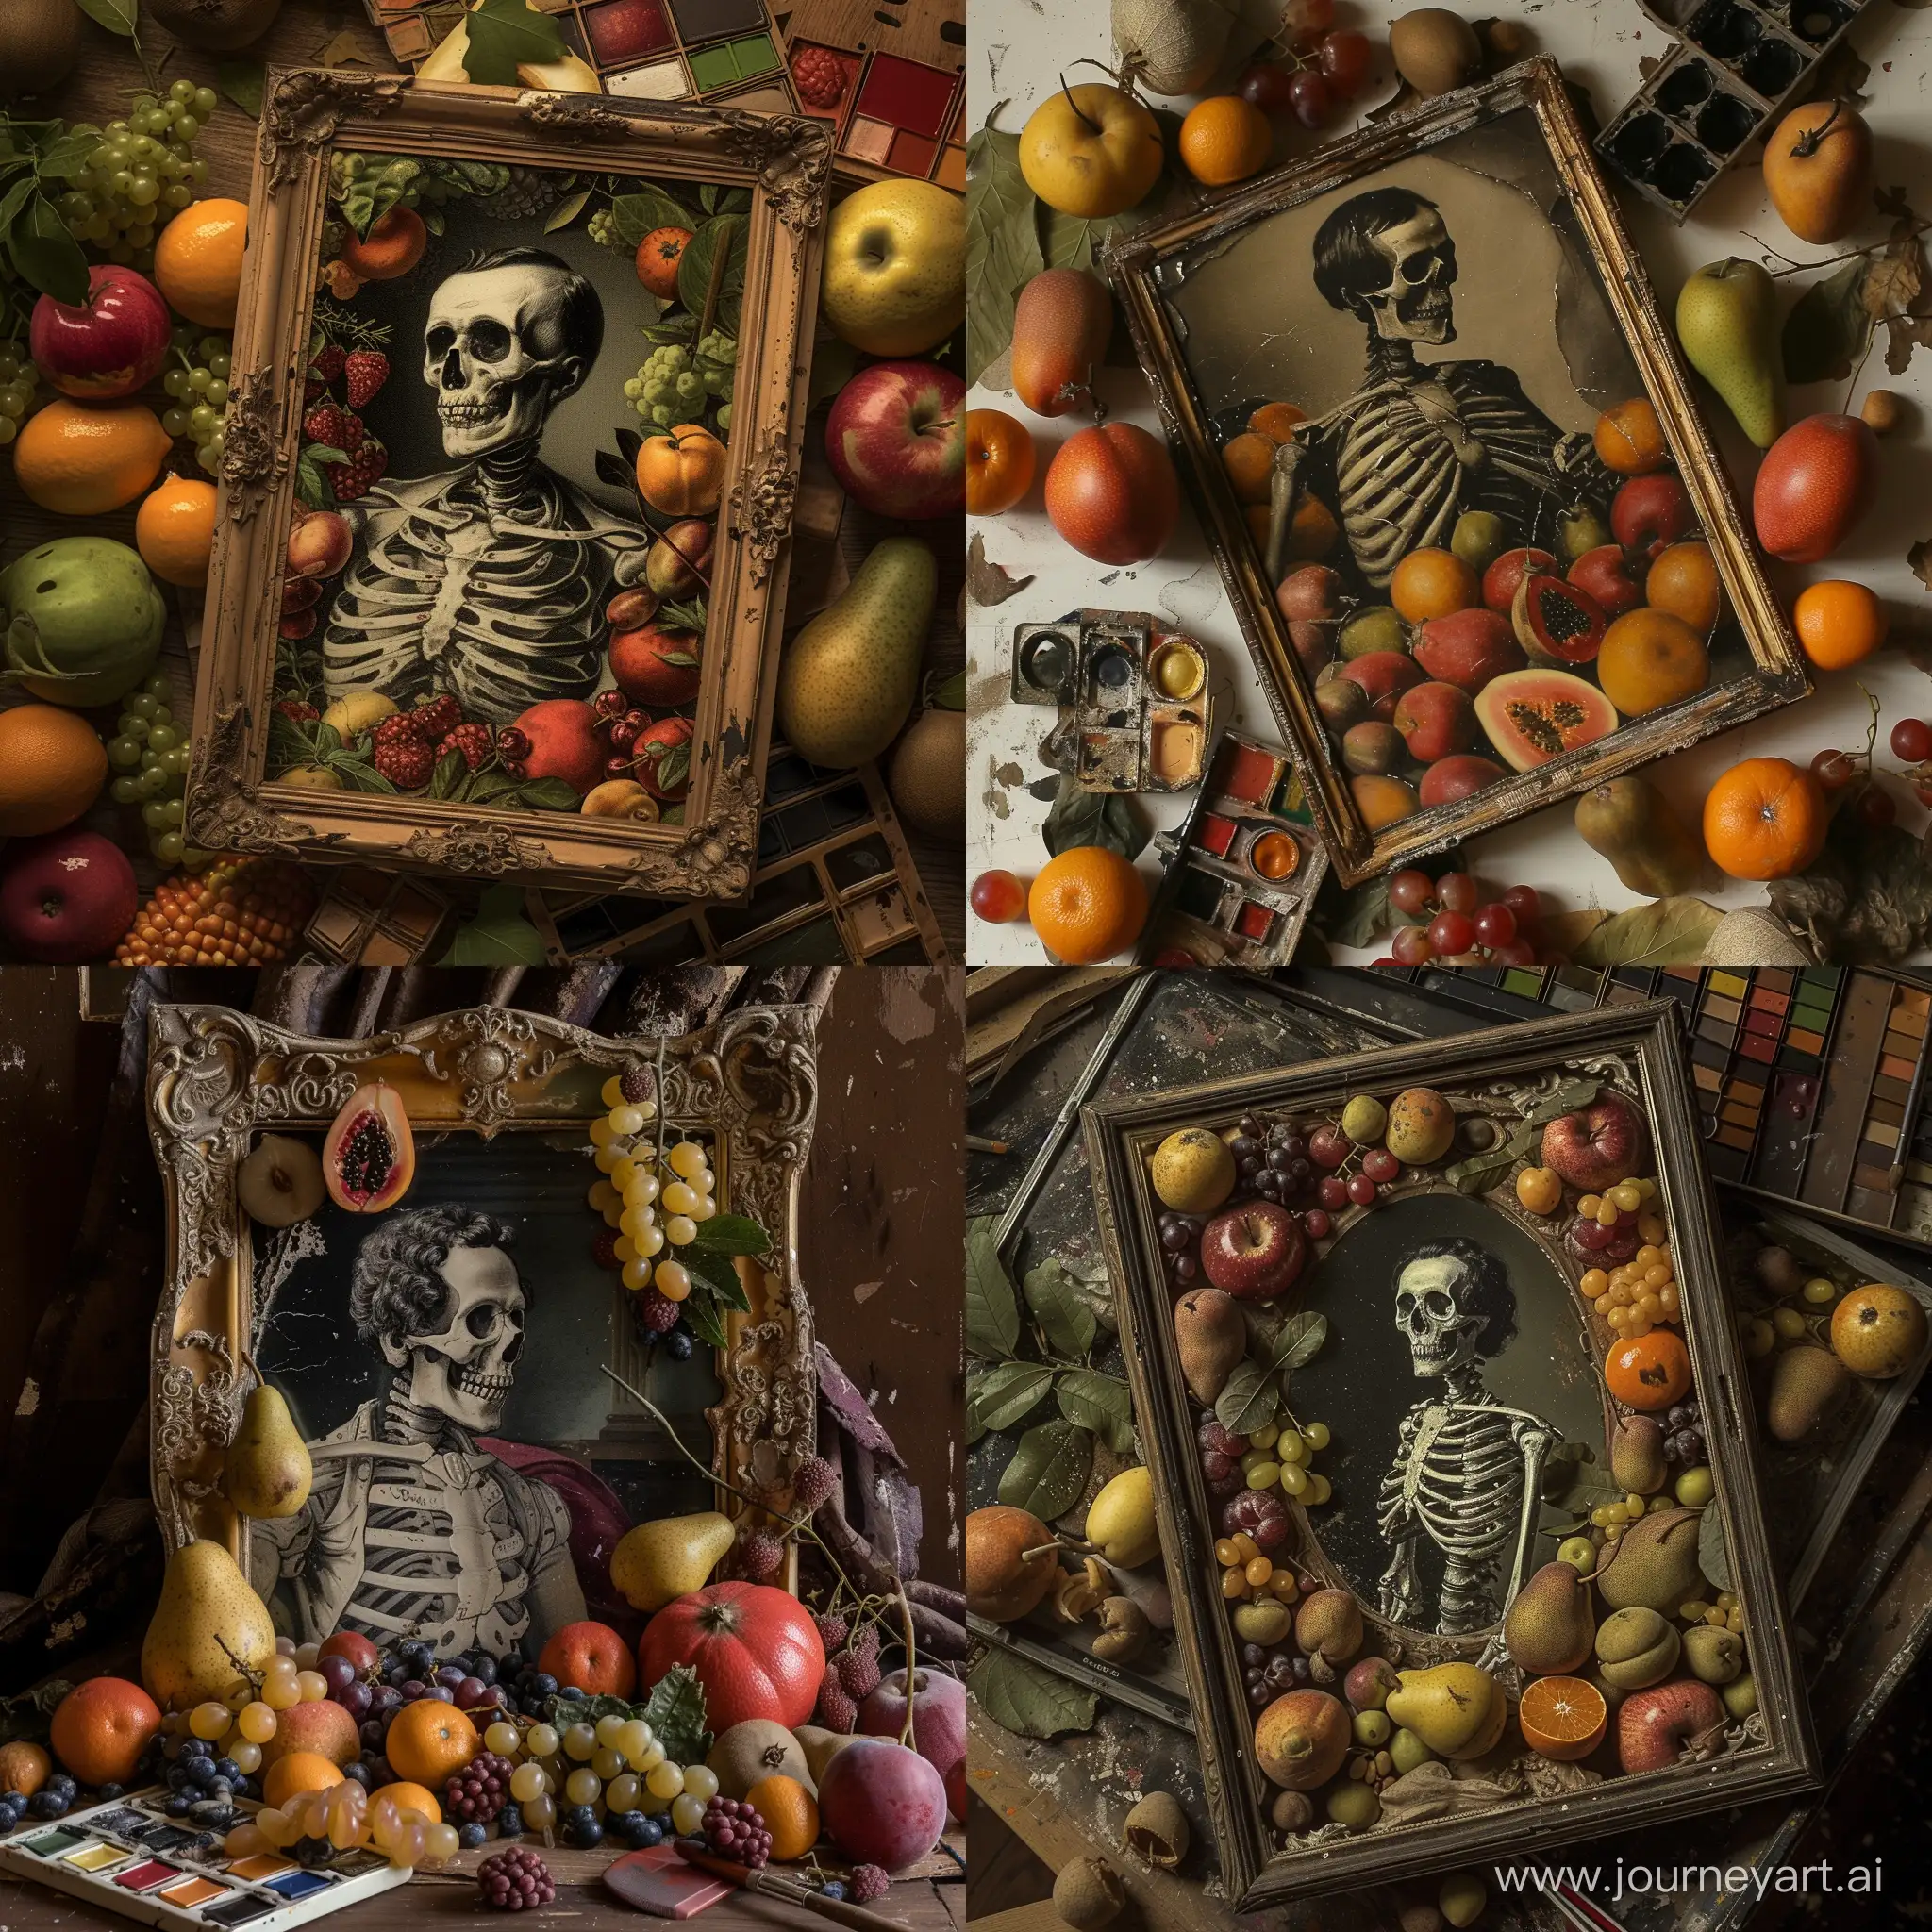 NapoleonEra-Man-Surrounded-by-Fruit-in-Vintage-Palette-Photo